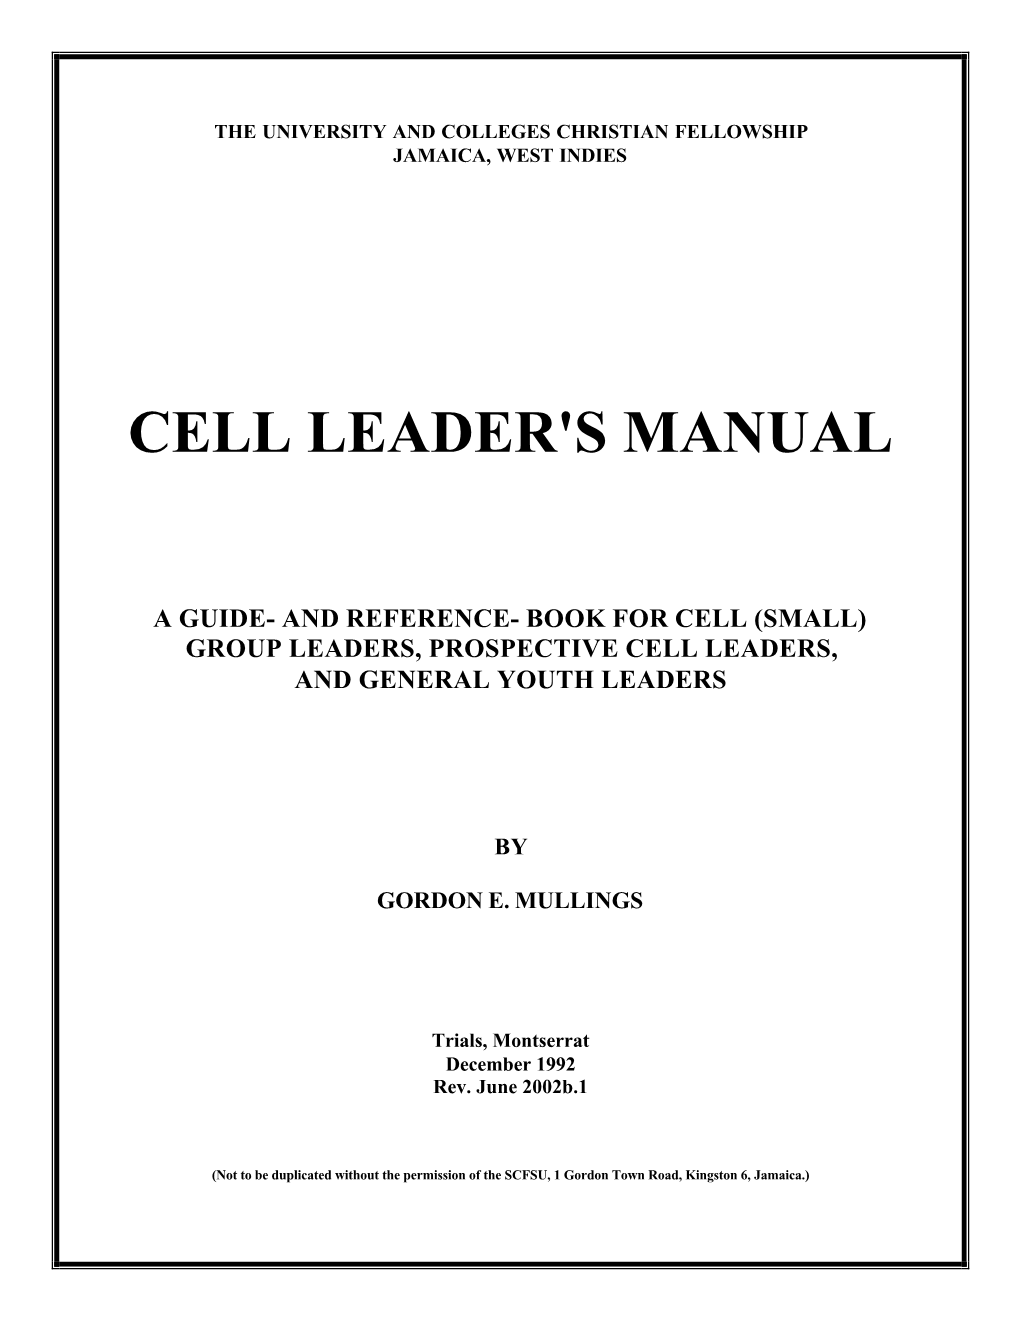 Cell Leader's Manual